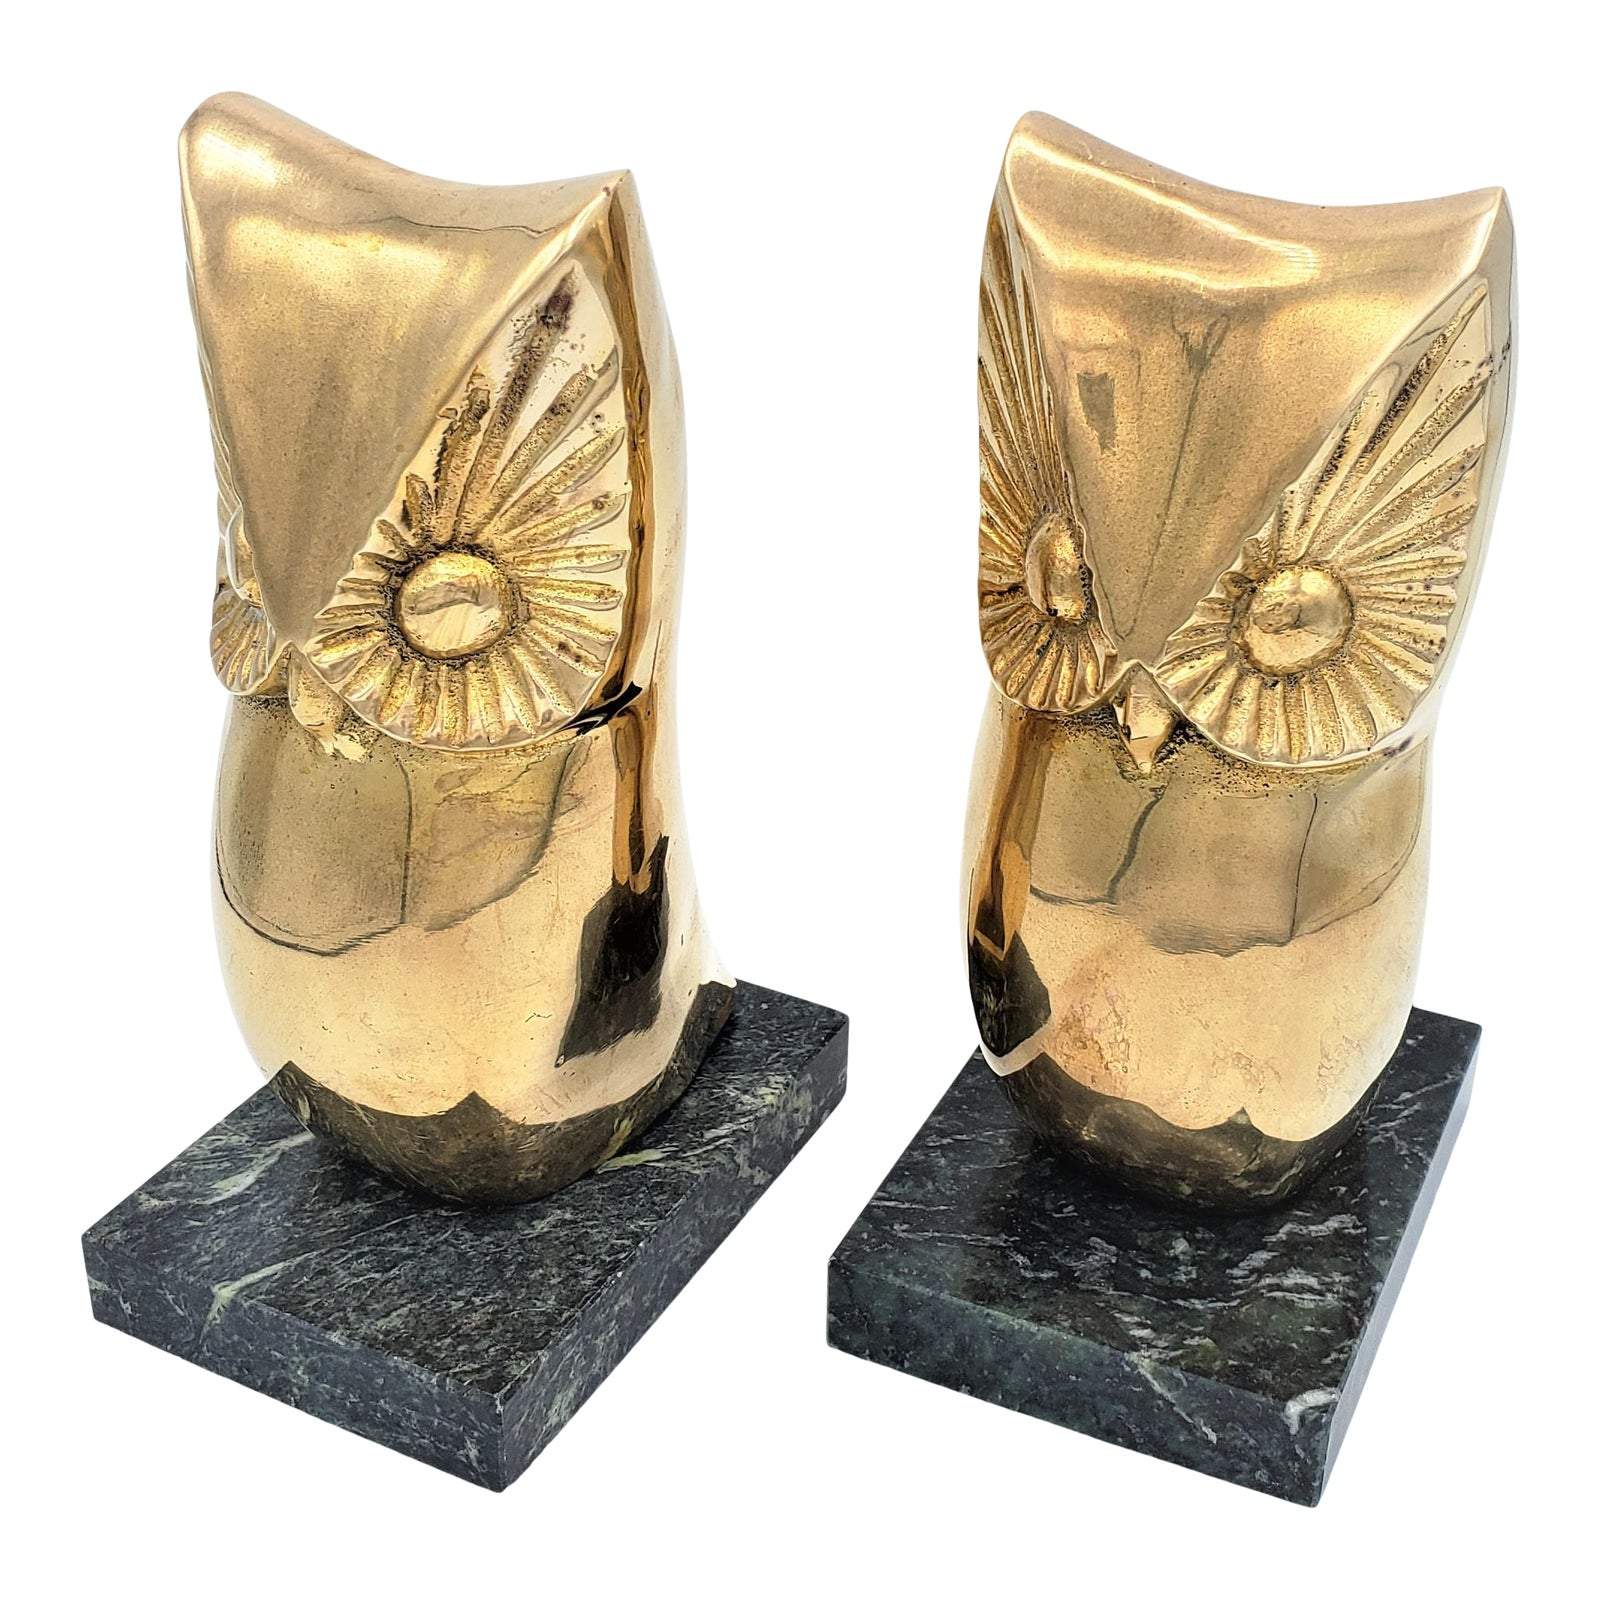 TMCMH Bookends Vintage Brass on Marble Base Owl Bookends 1960's Retro Modernist Super Stylish!